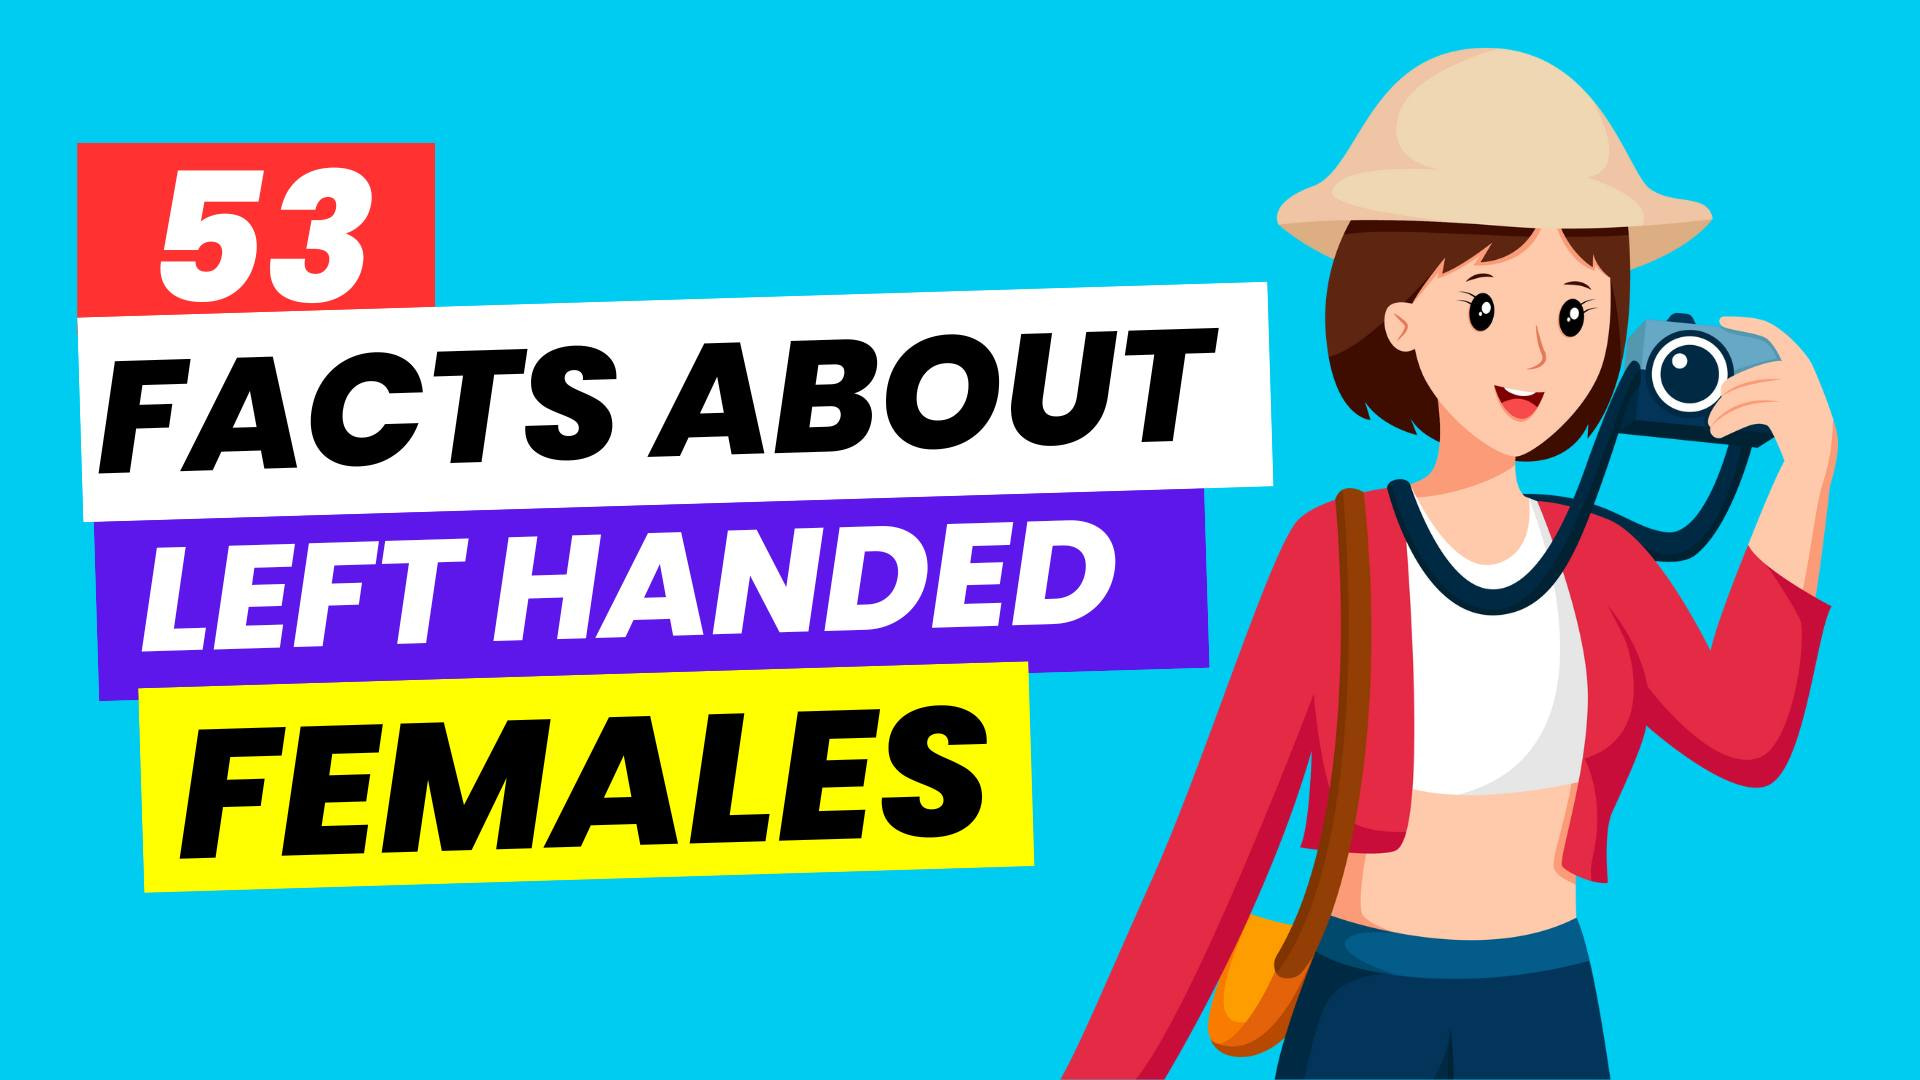 59 Interesting Facts About Left Handers